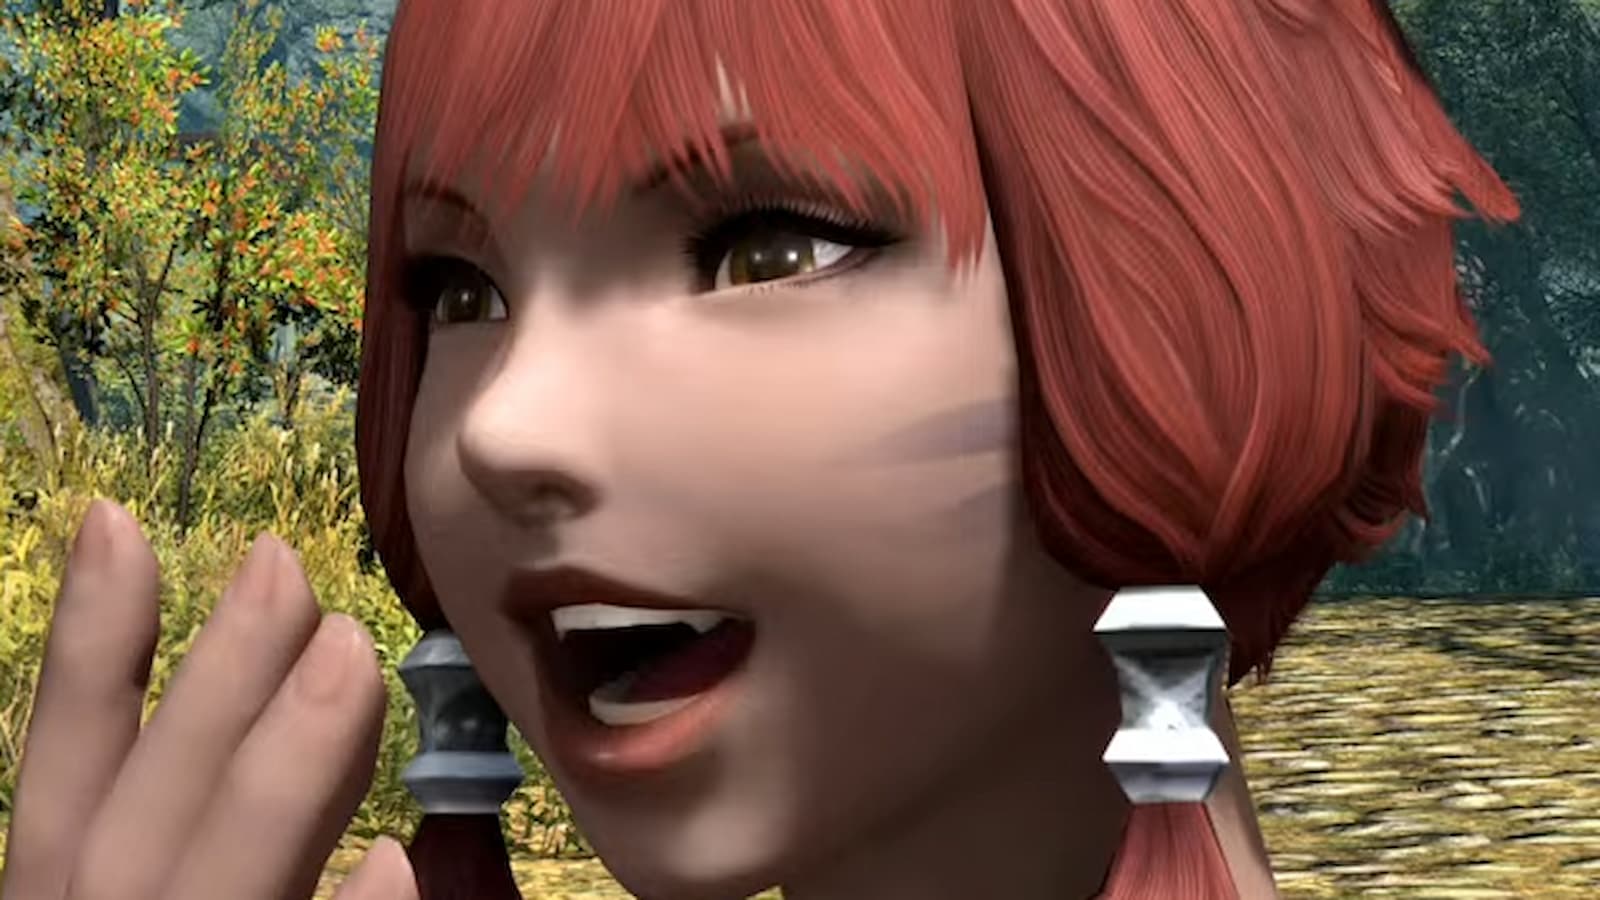 Final Fantasy 14 will fix character teeth changes because everyone hates them